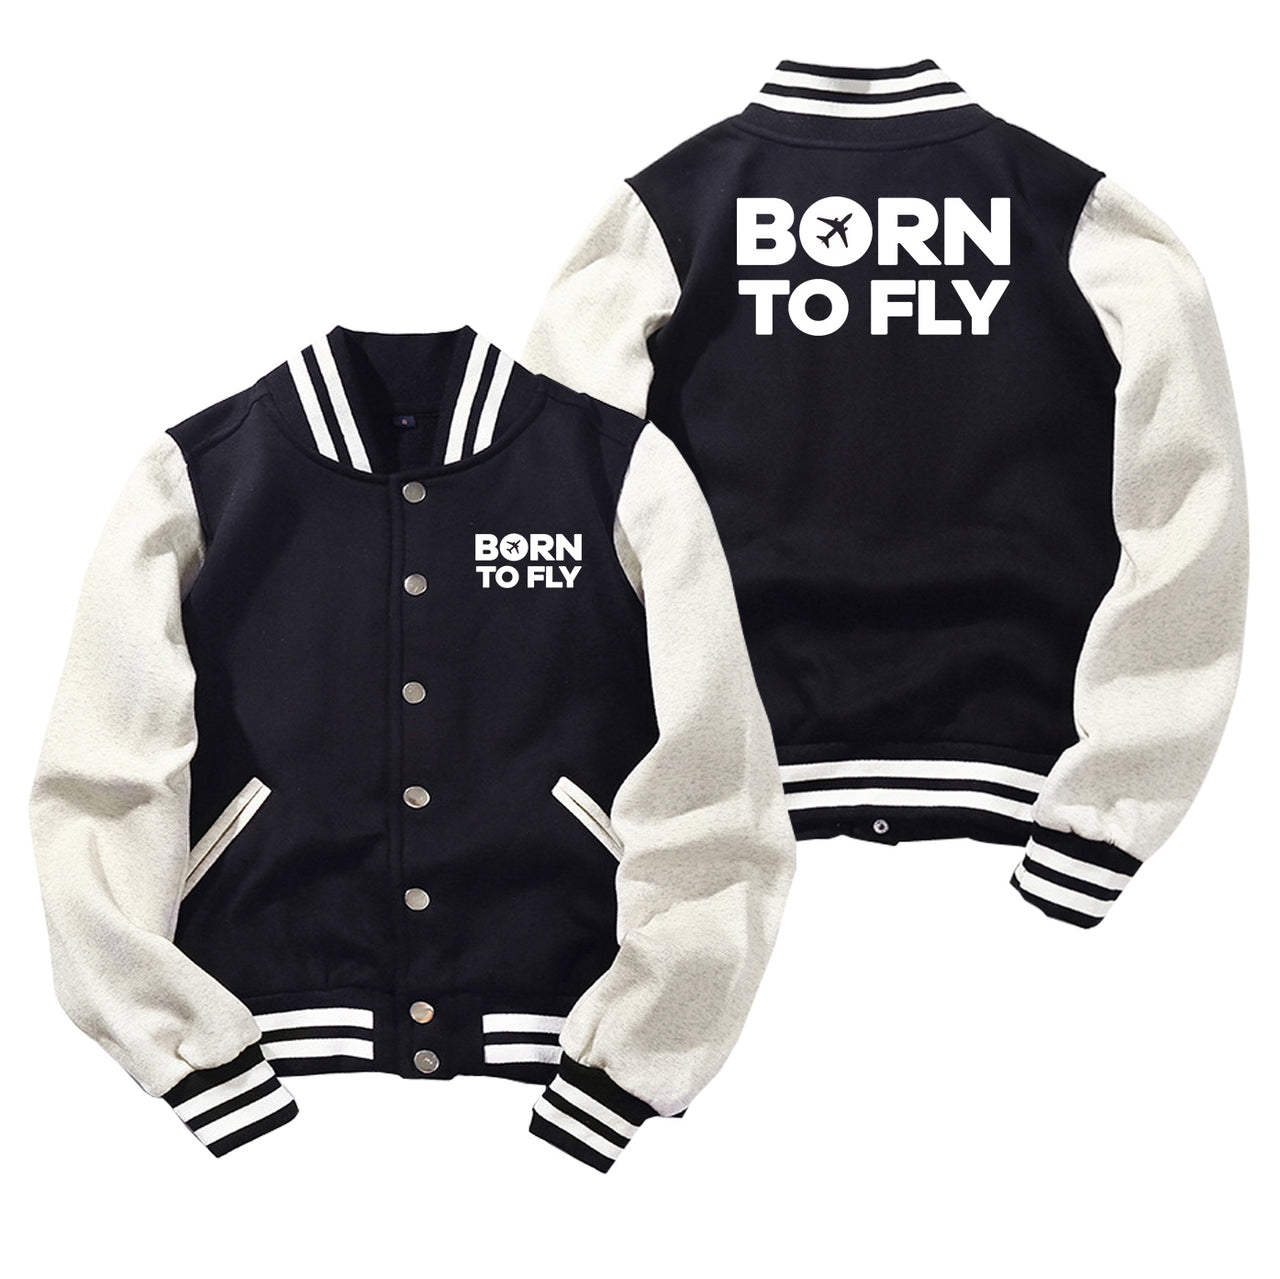 Born To Fly Special Designed Baseball Style Jackets